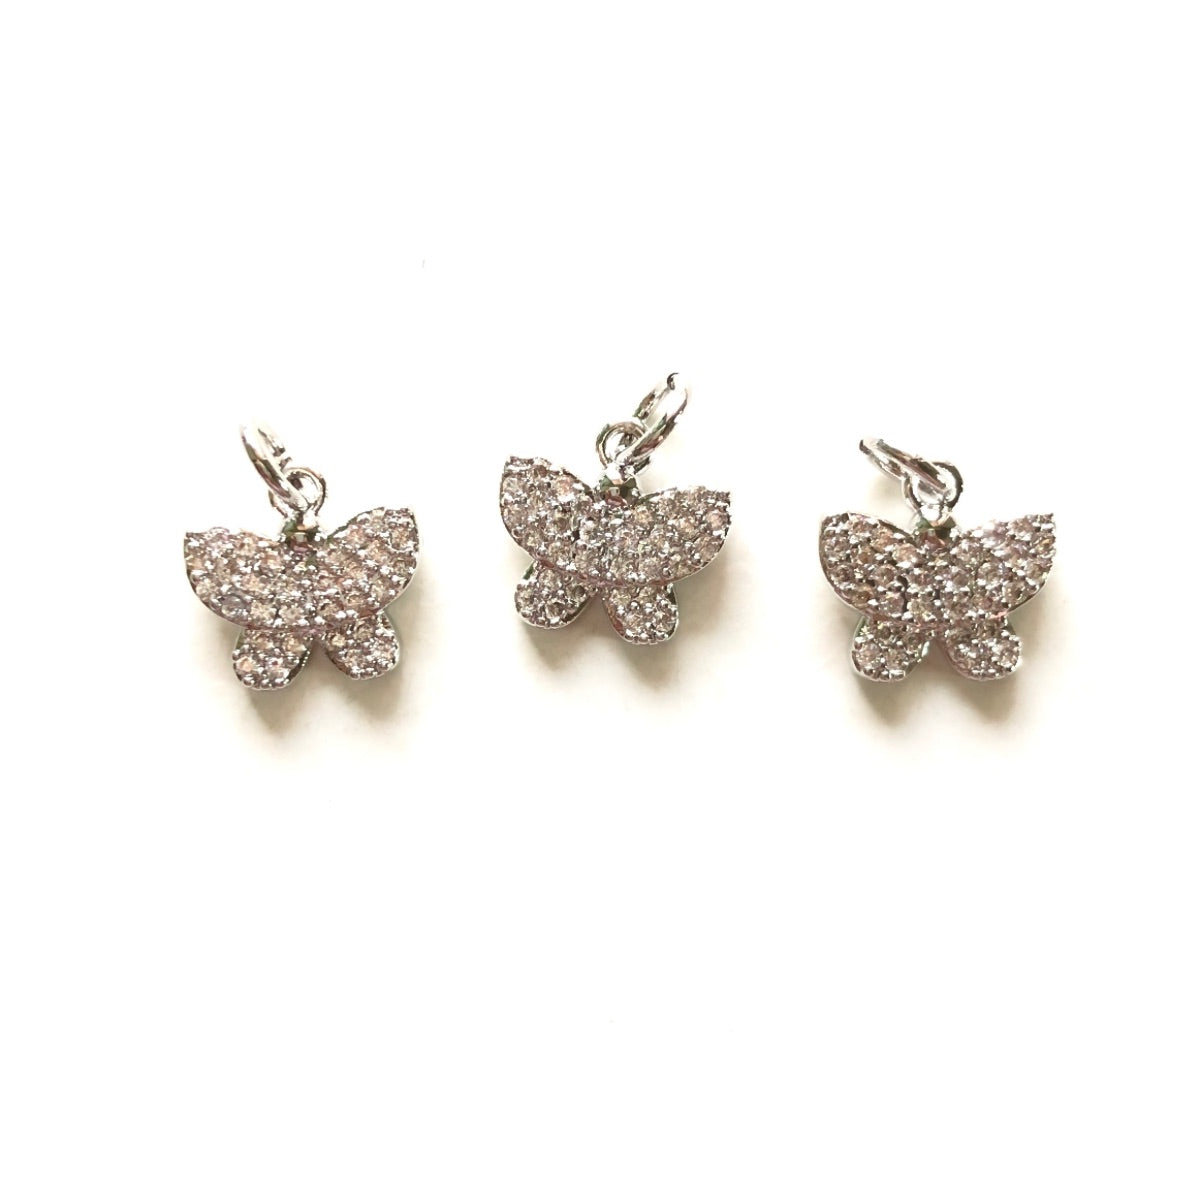 10pcs/lot 10.8*10.3mm Small Size CZ Pave Butterfly Charms Silver CZ Paved Charms Butterflies Small Sizes Charms Beads Beyond